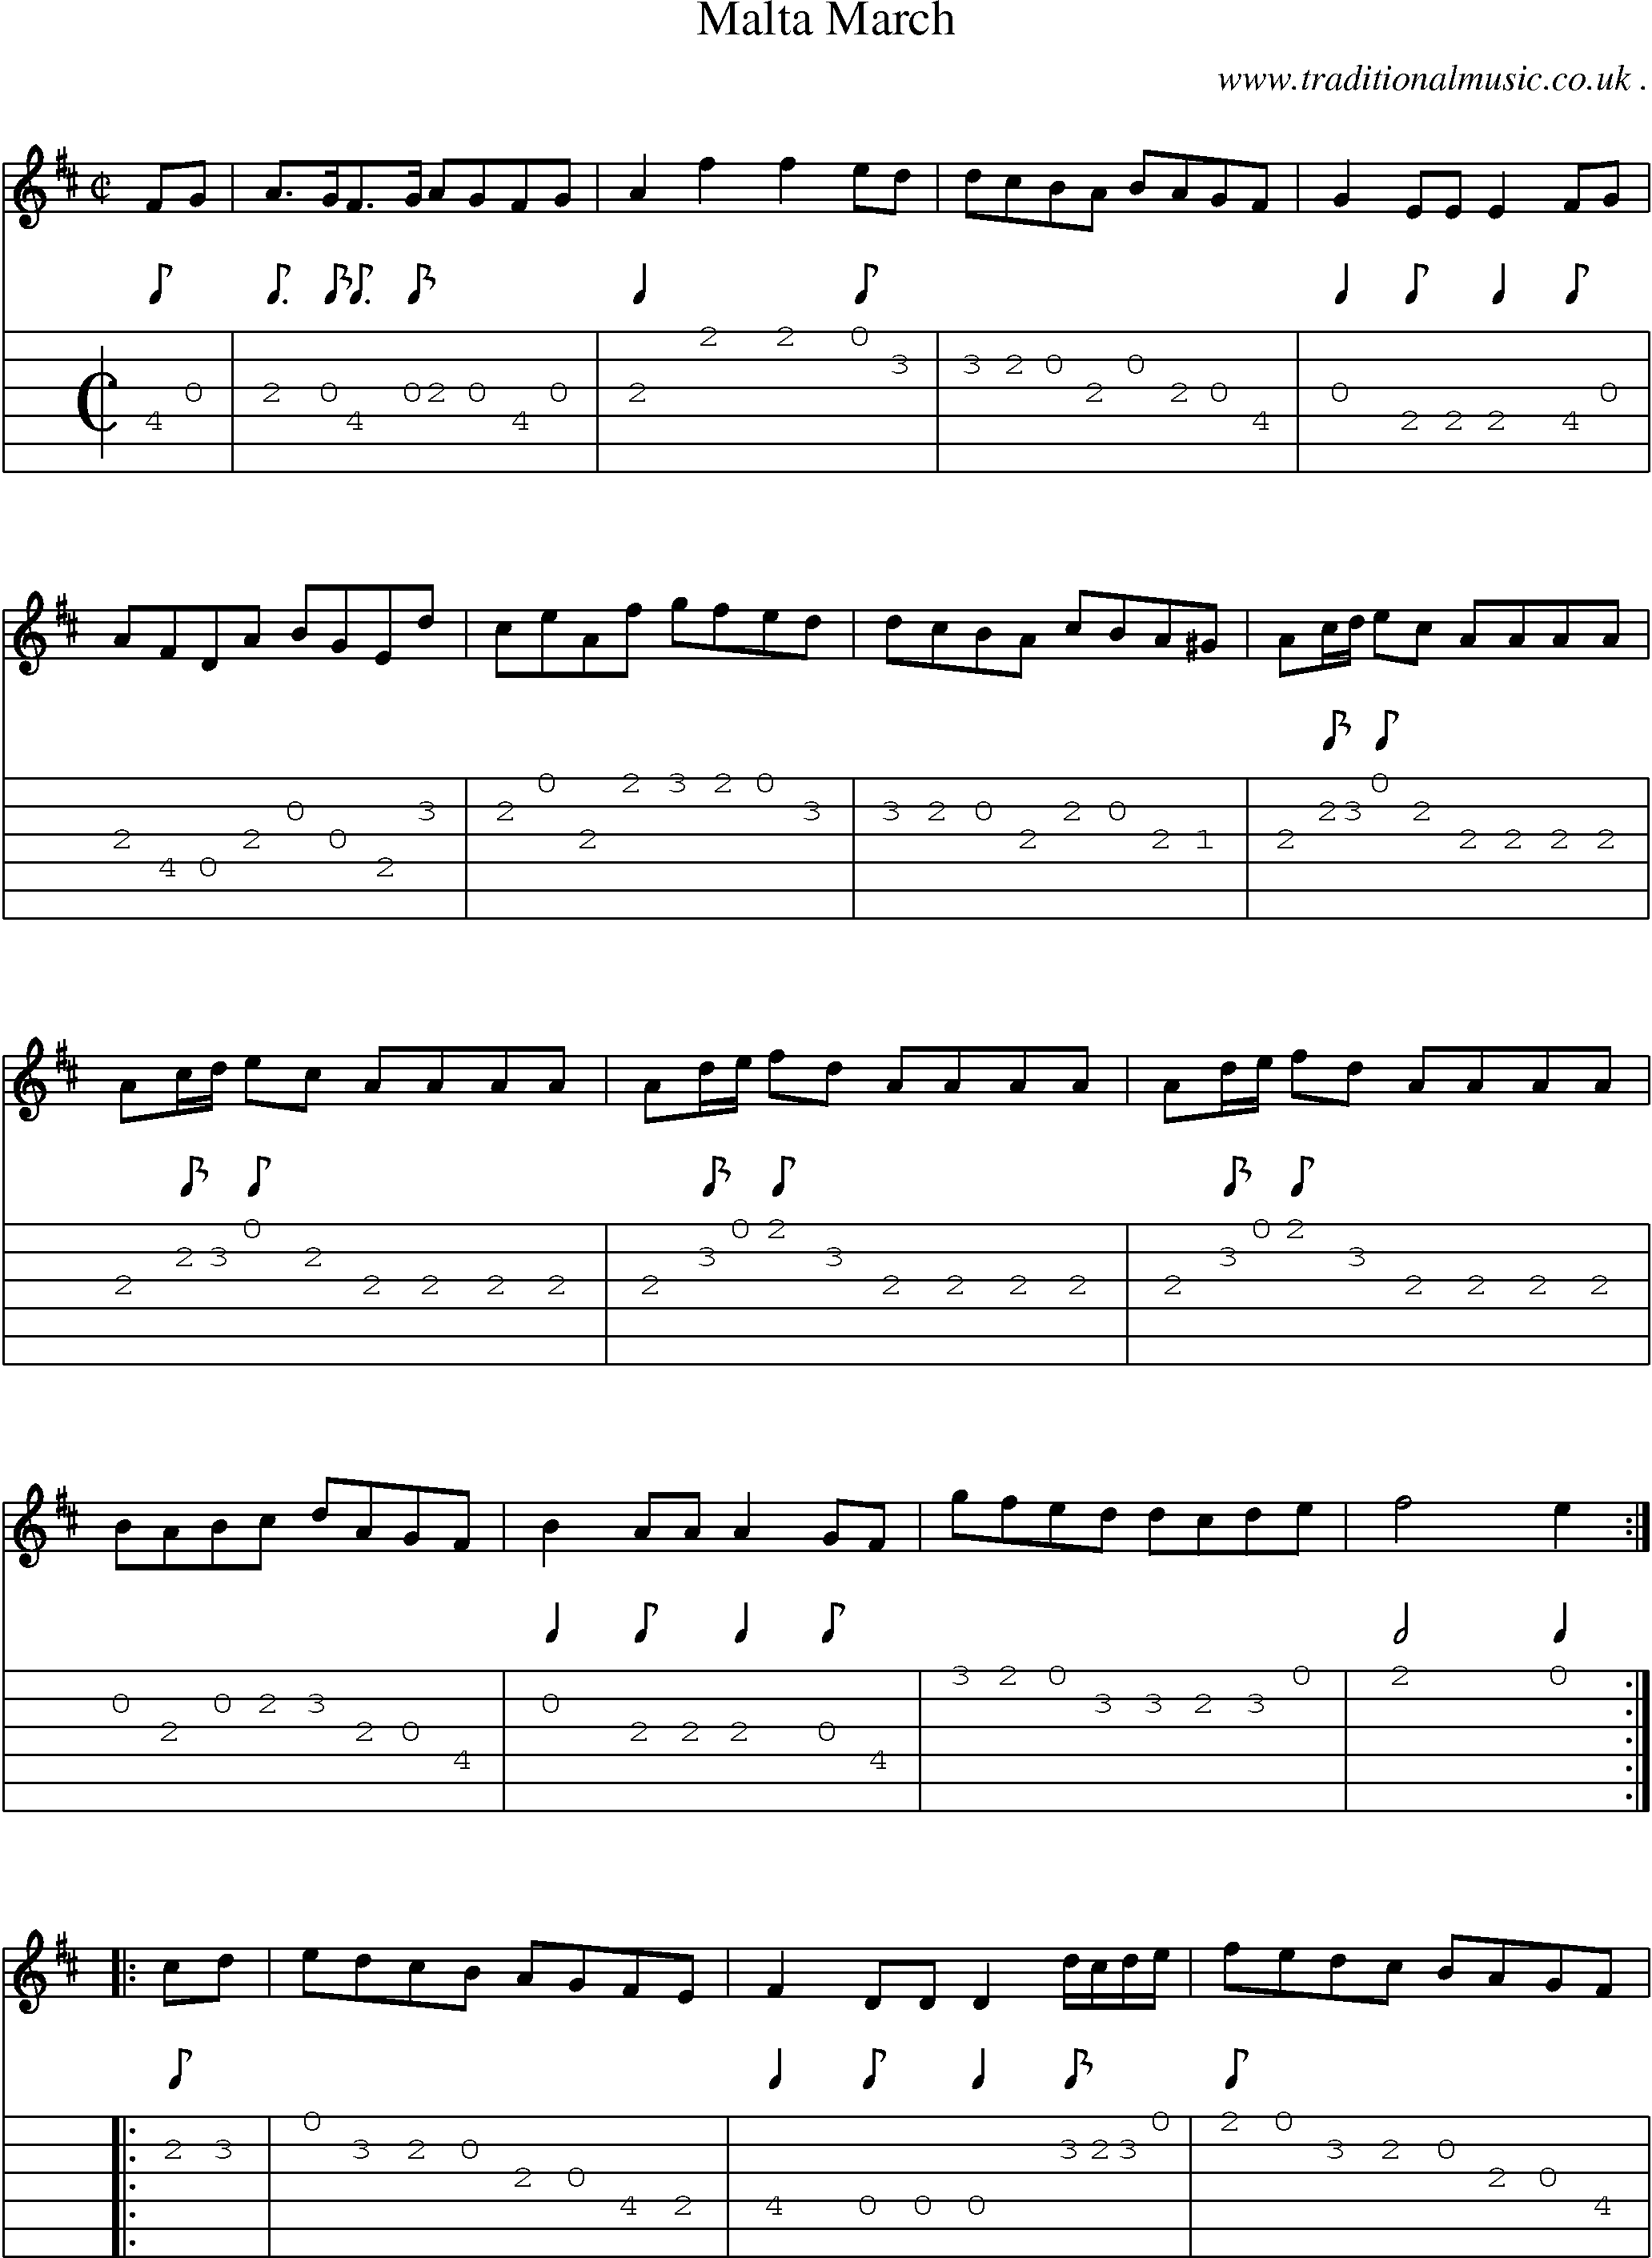 Sheet-Music and Guitar Tabs for Malta March